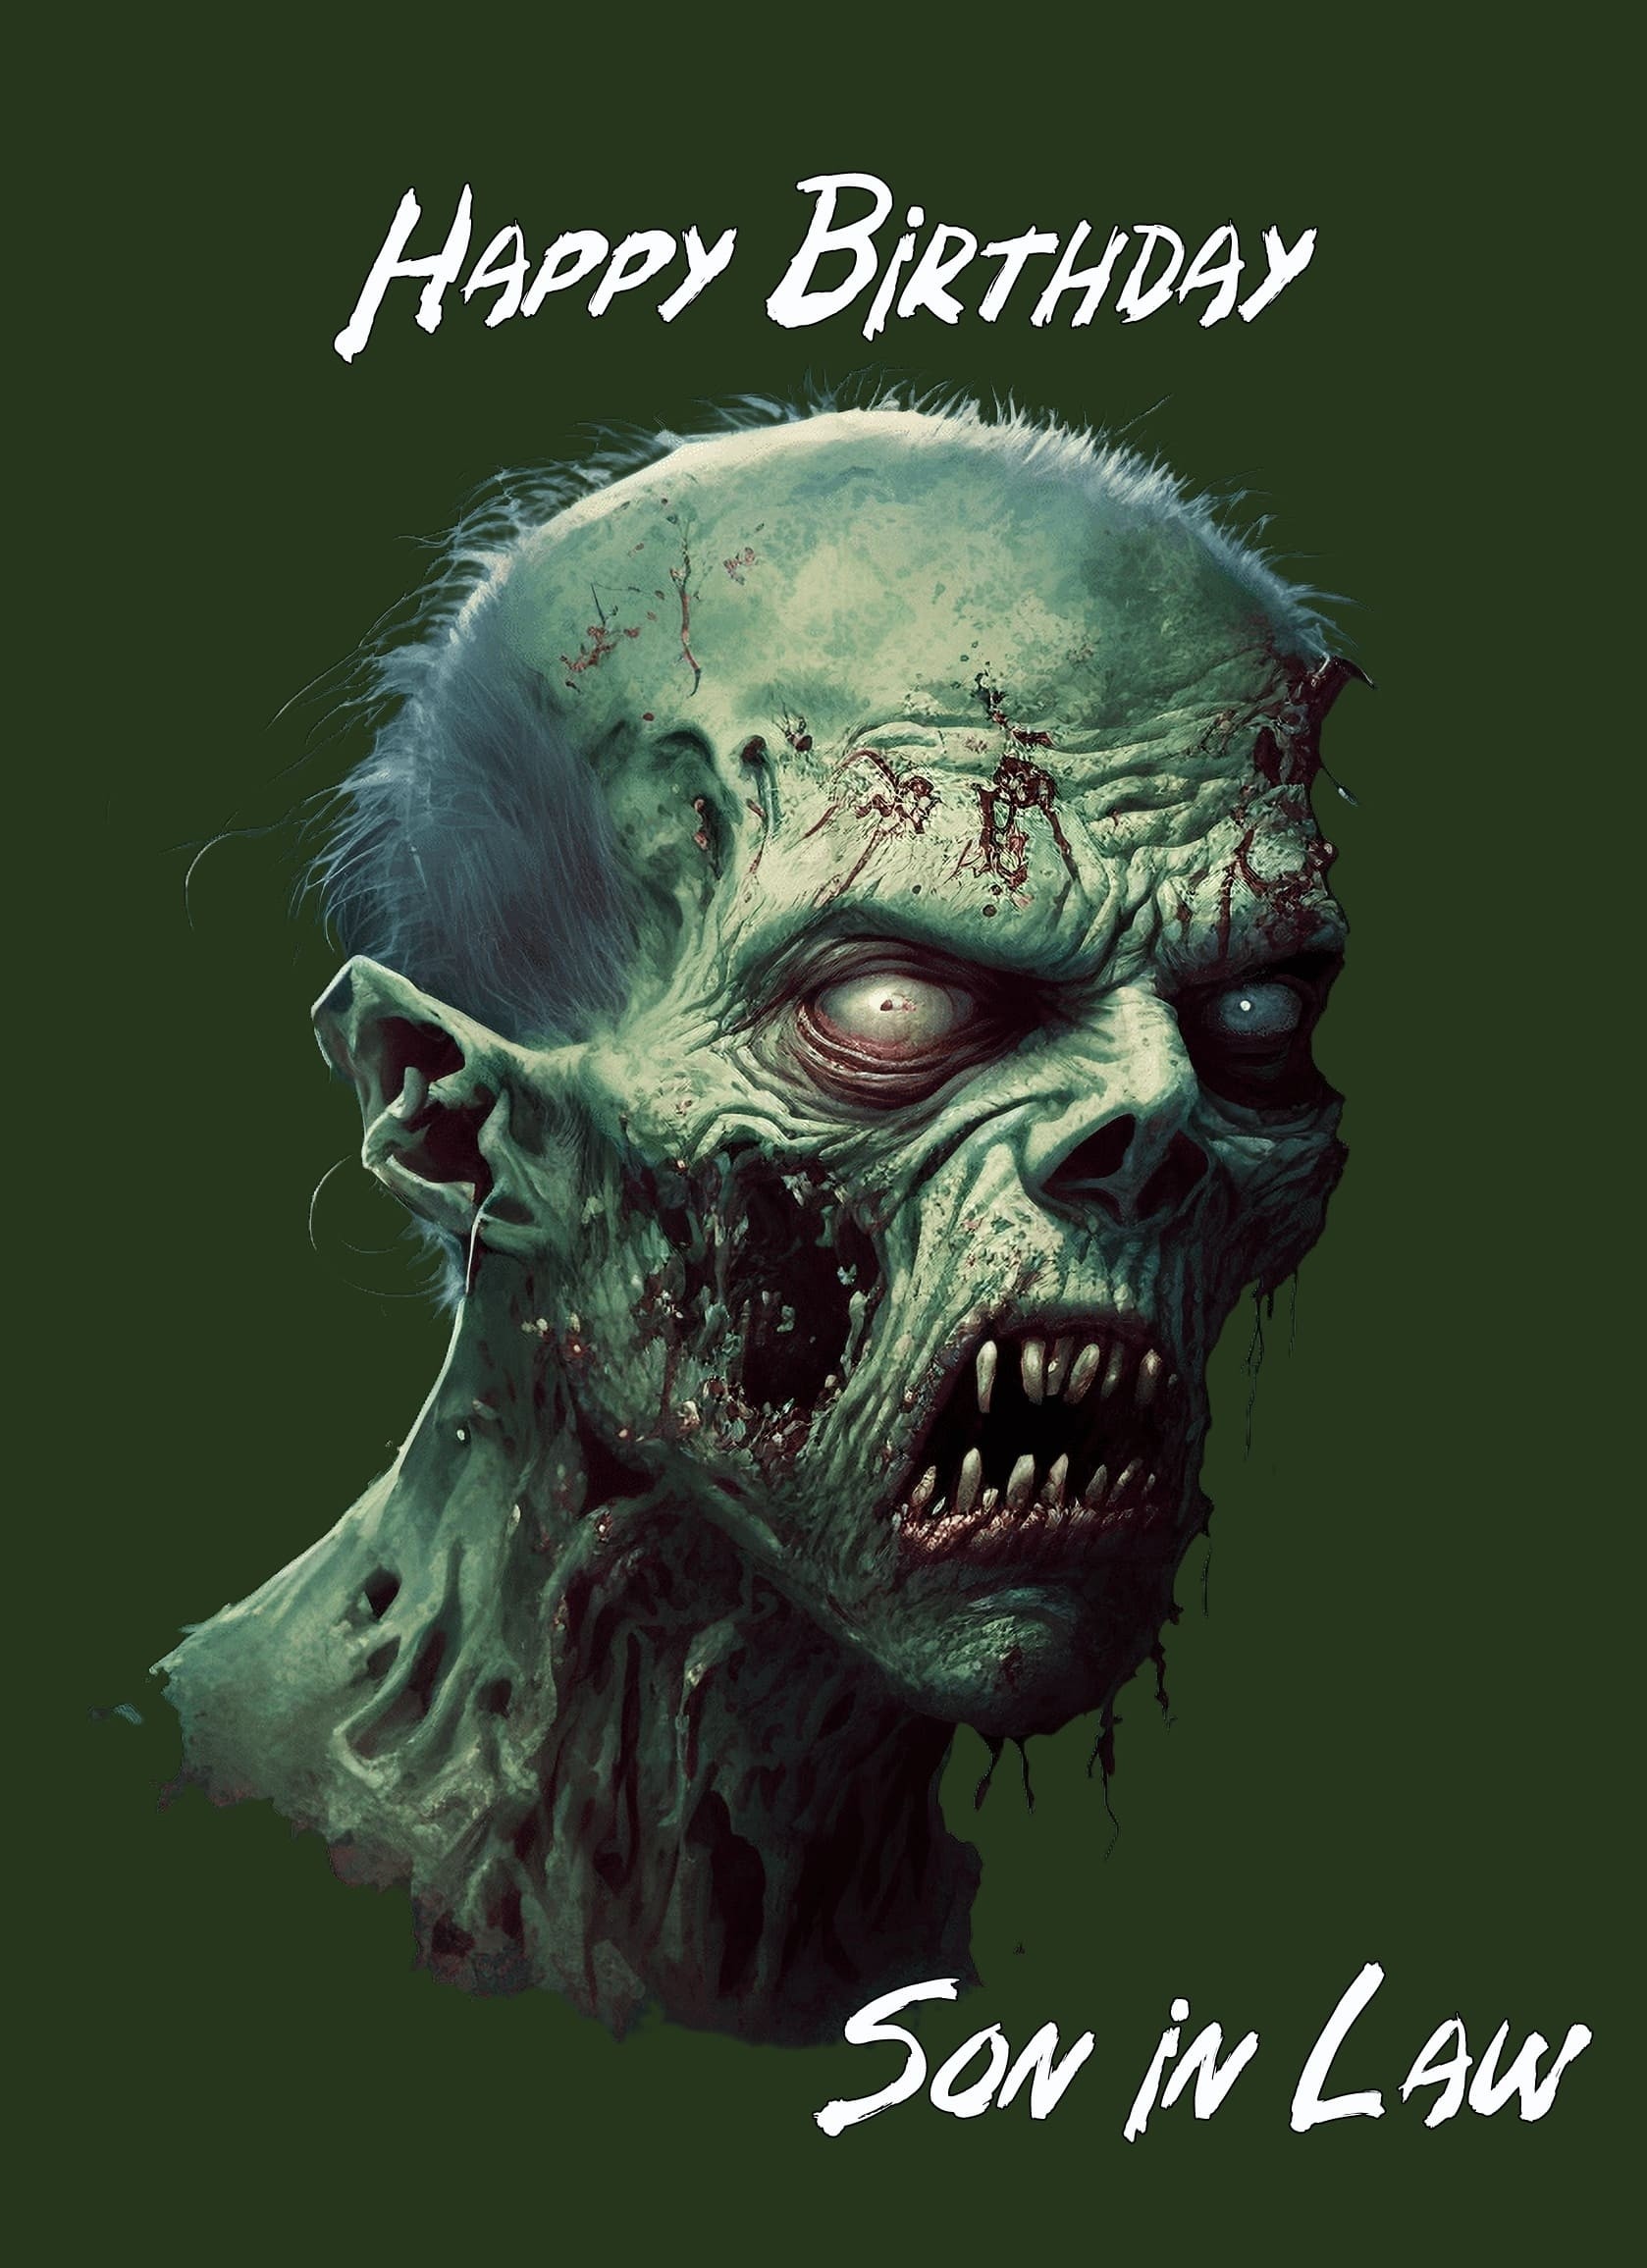 Zombie Birthday Card for Son in Law